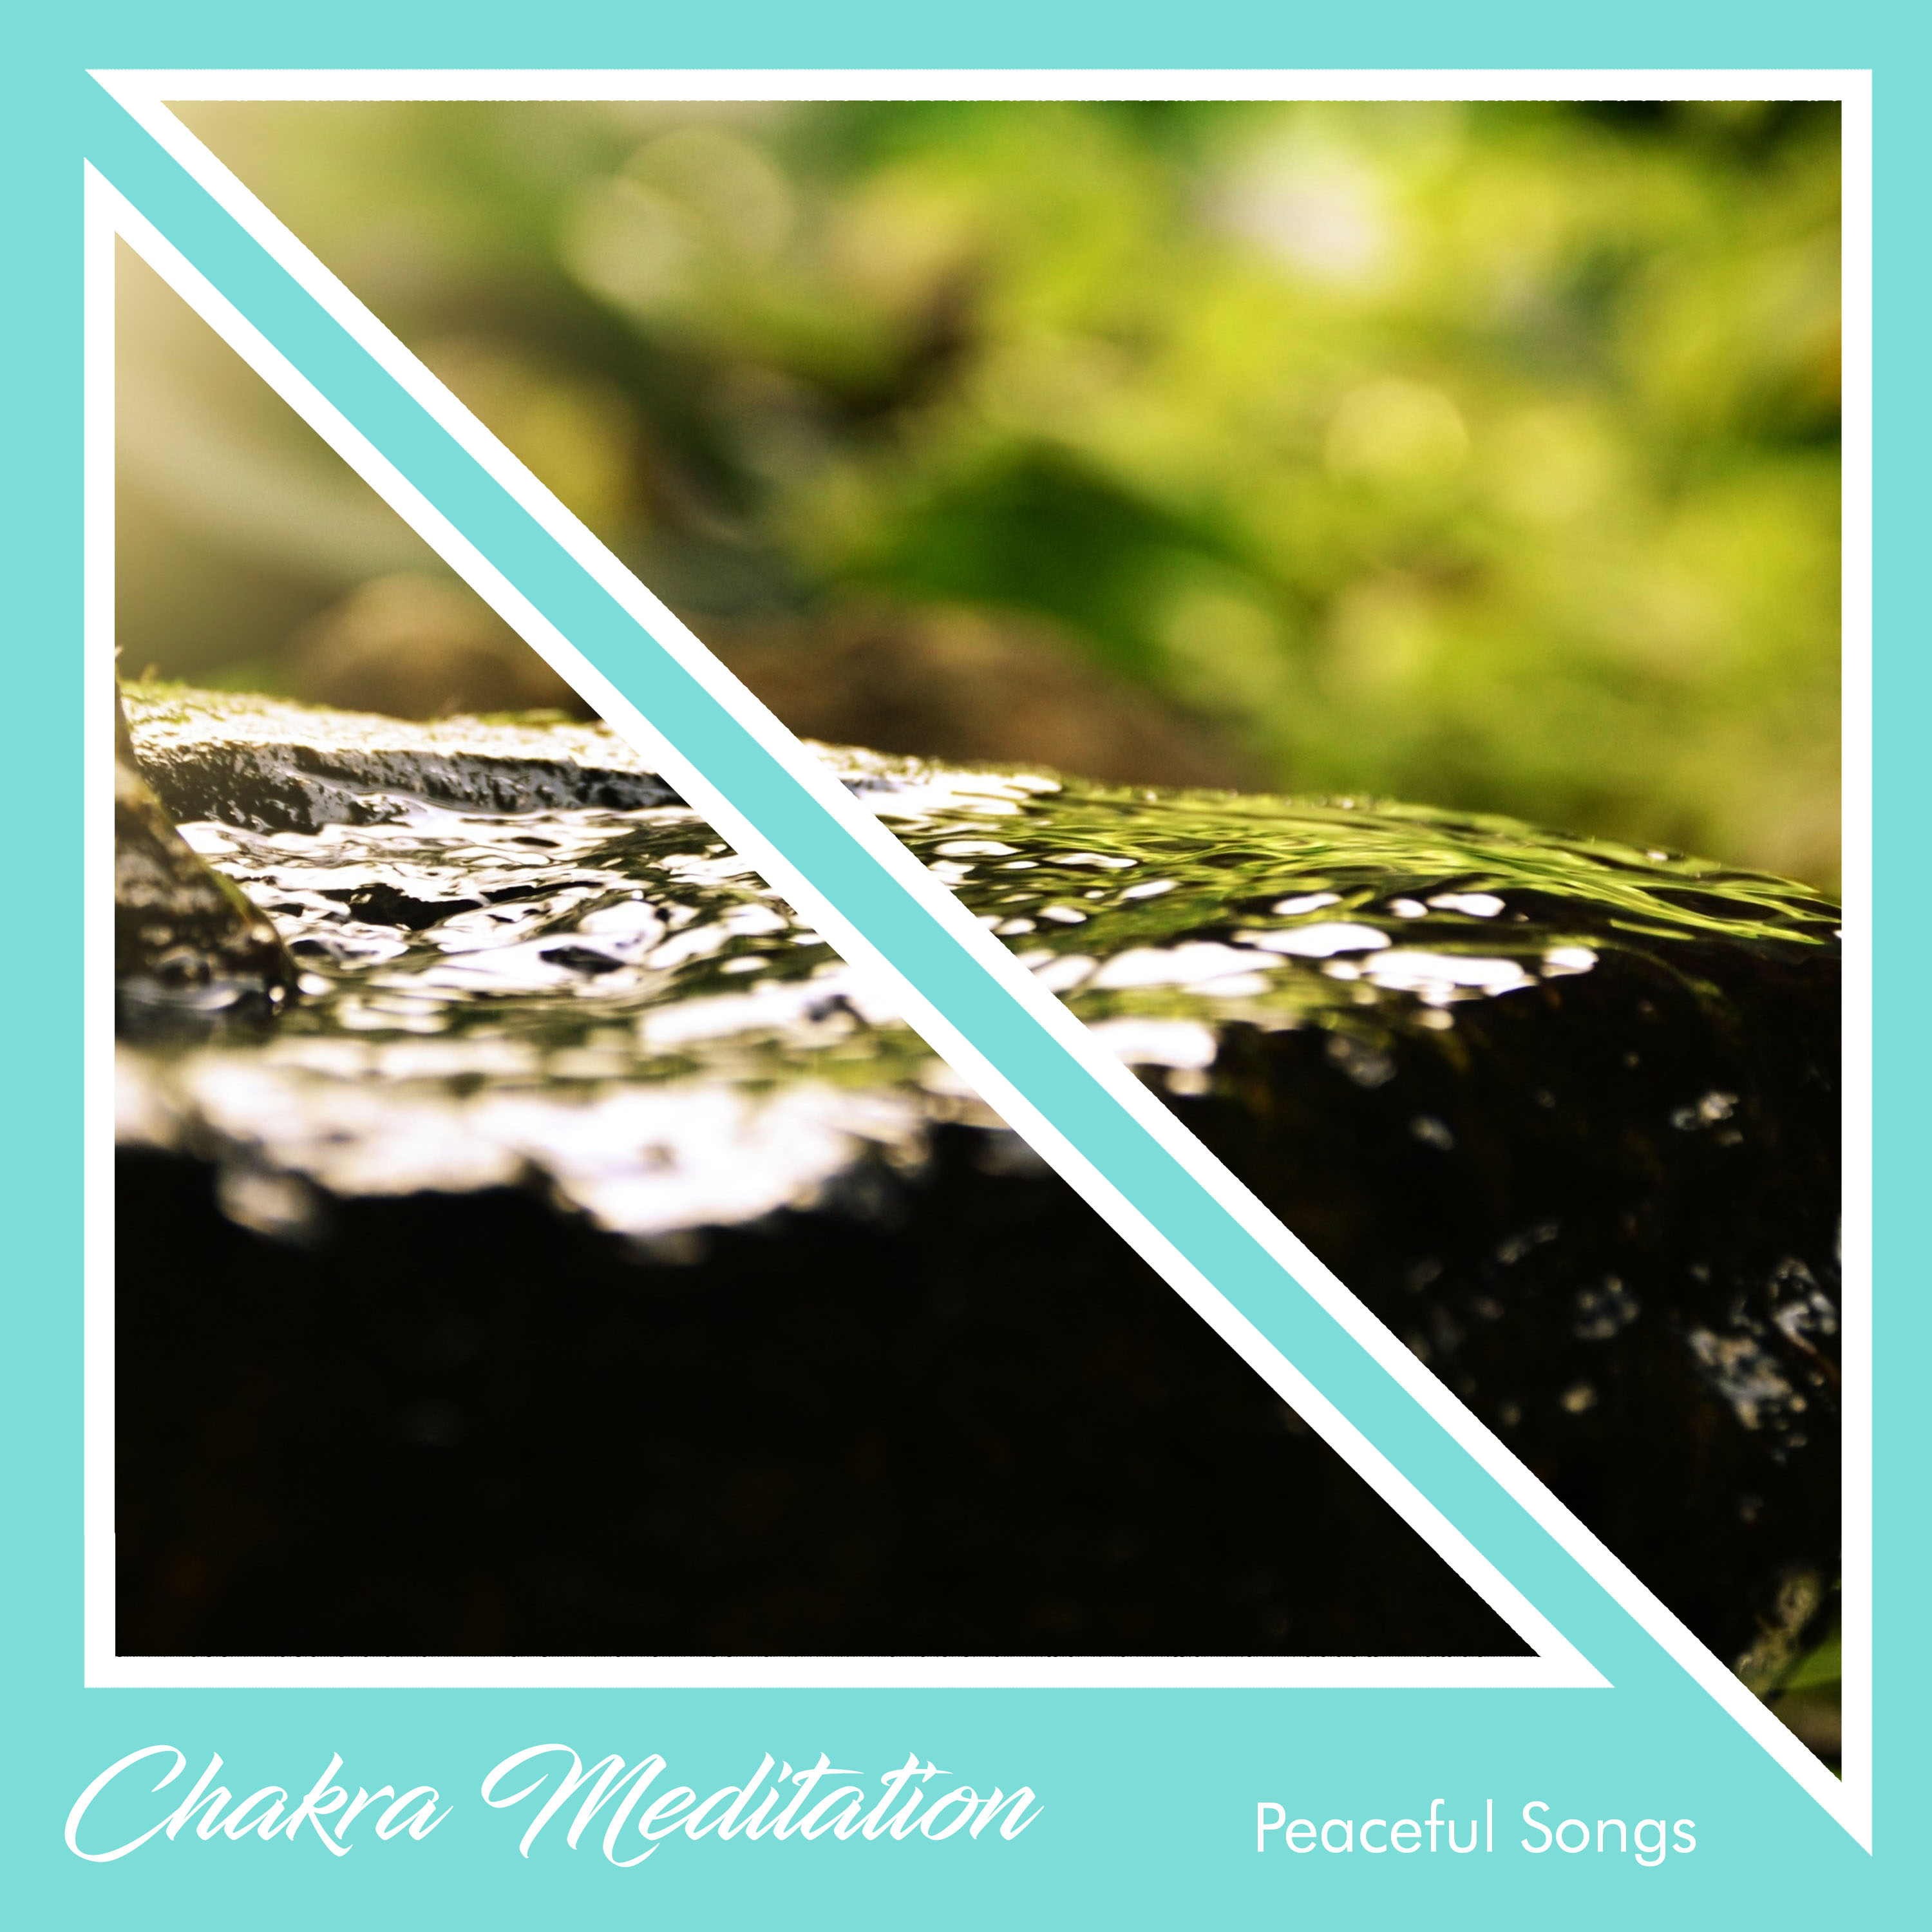 17 Peaceful Songs for Chakra Meditation